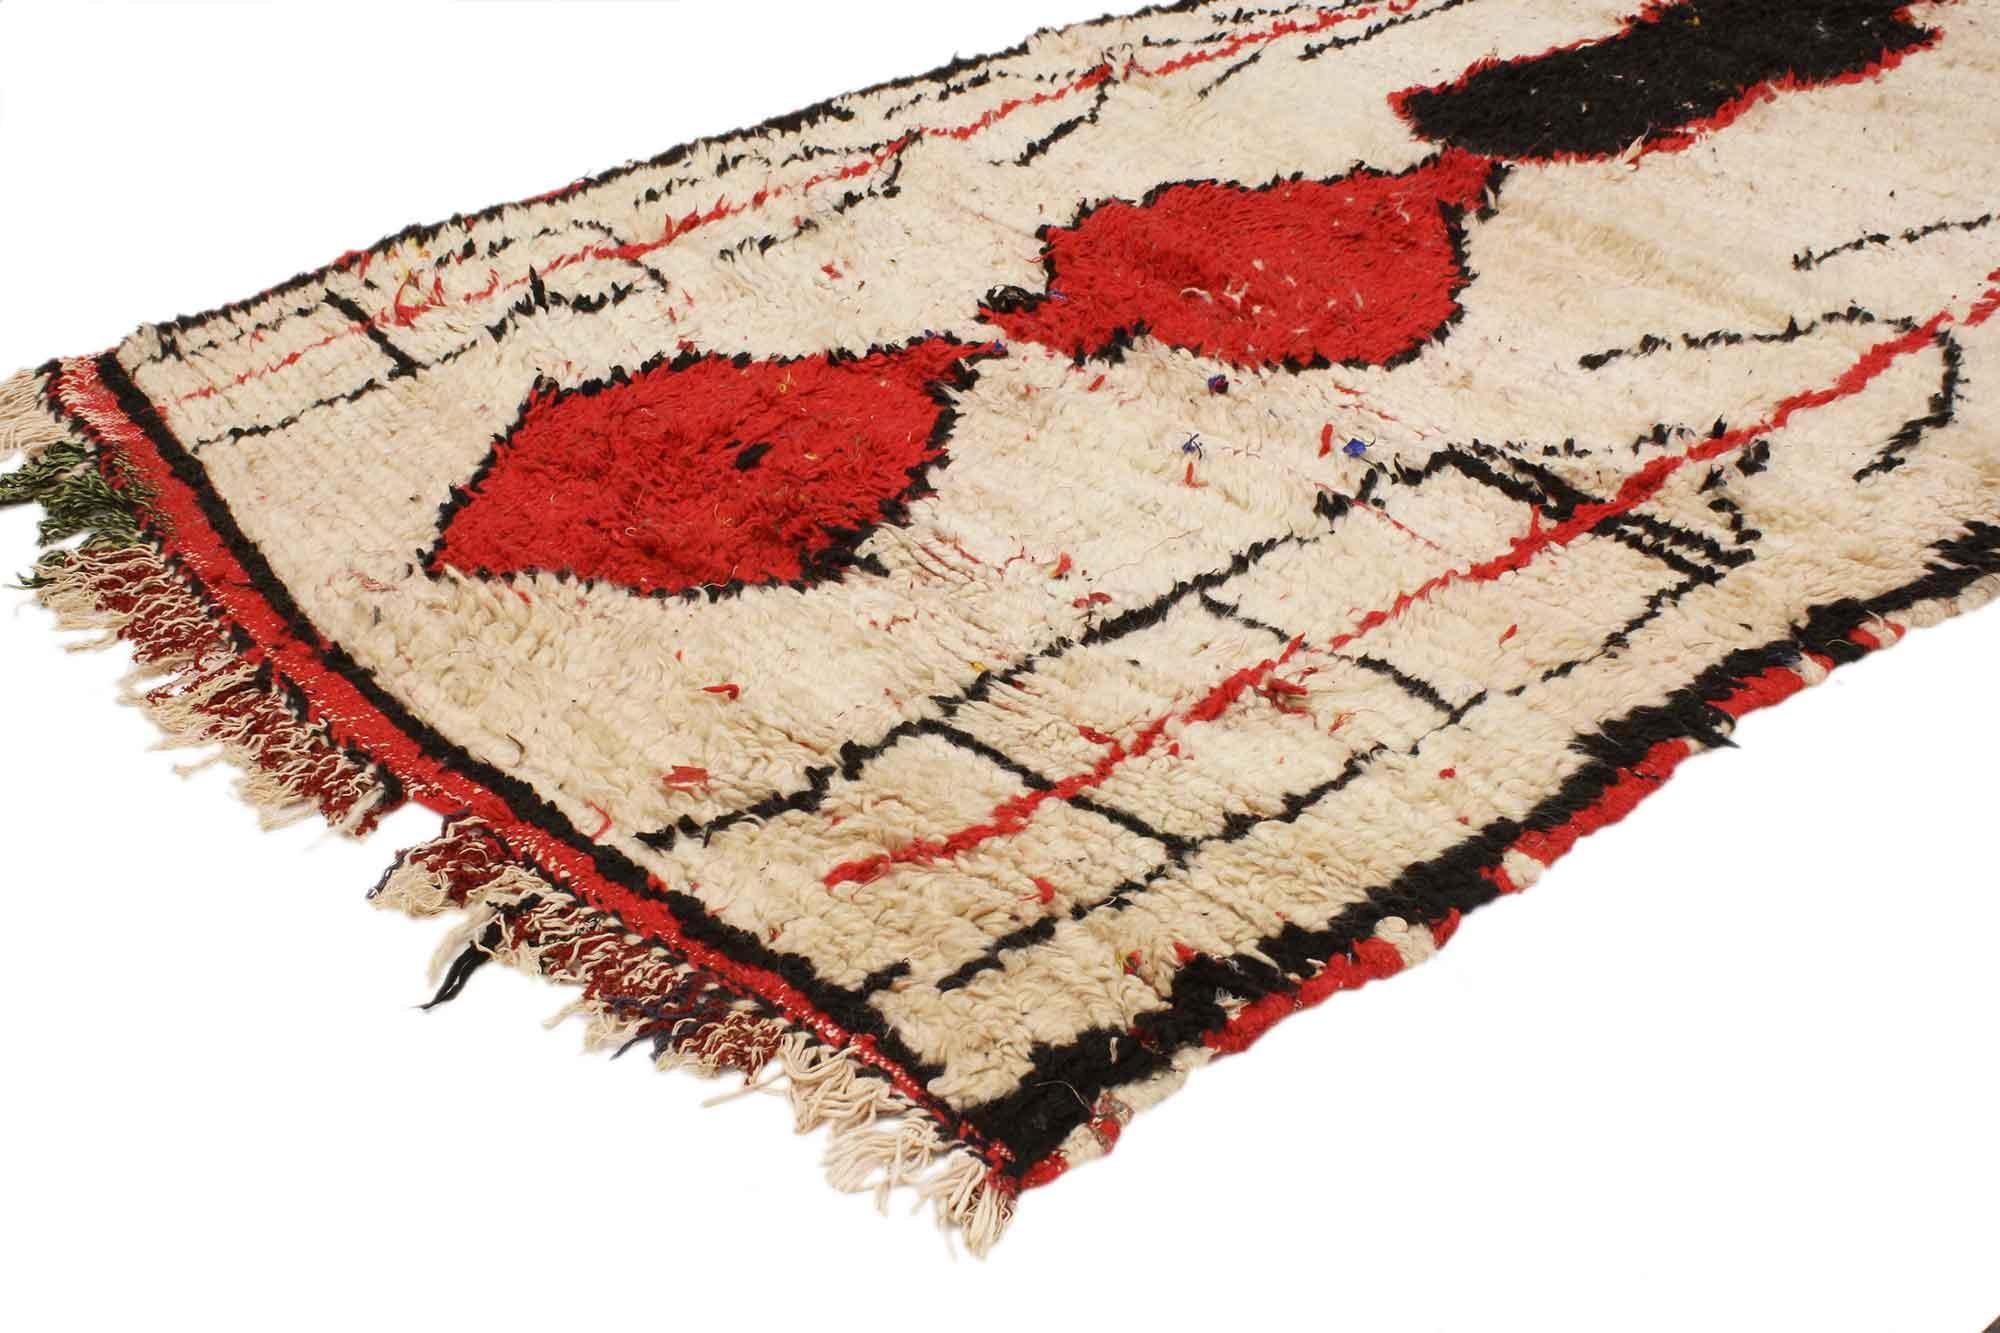 20372 Vintage Berber Moroccan Azilal runner 03’07 x 09’06. Showcasing a bold expressive design, incredible detail and texture, this hand knotted wool vintage Berber Moroccan Azilal rug is a captivating vision of woven beauty. The eye-catching